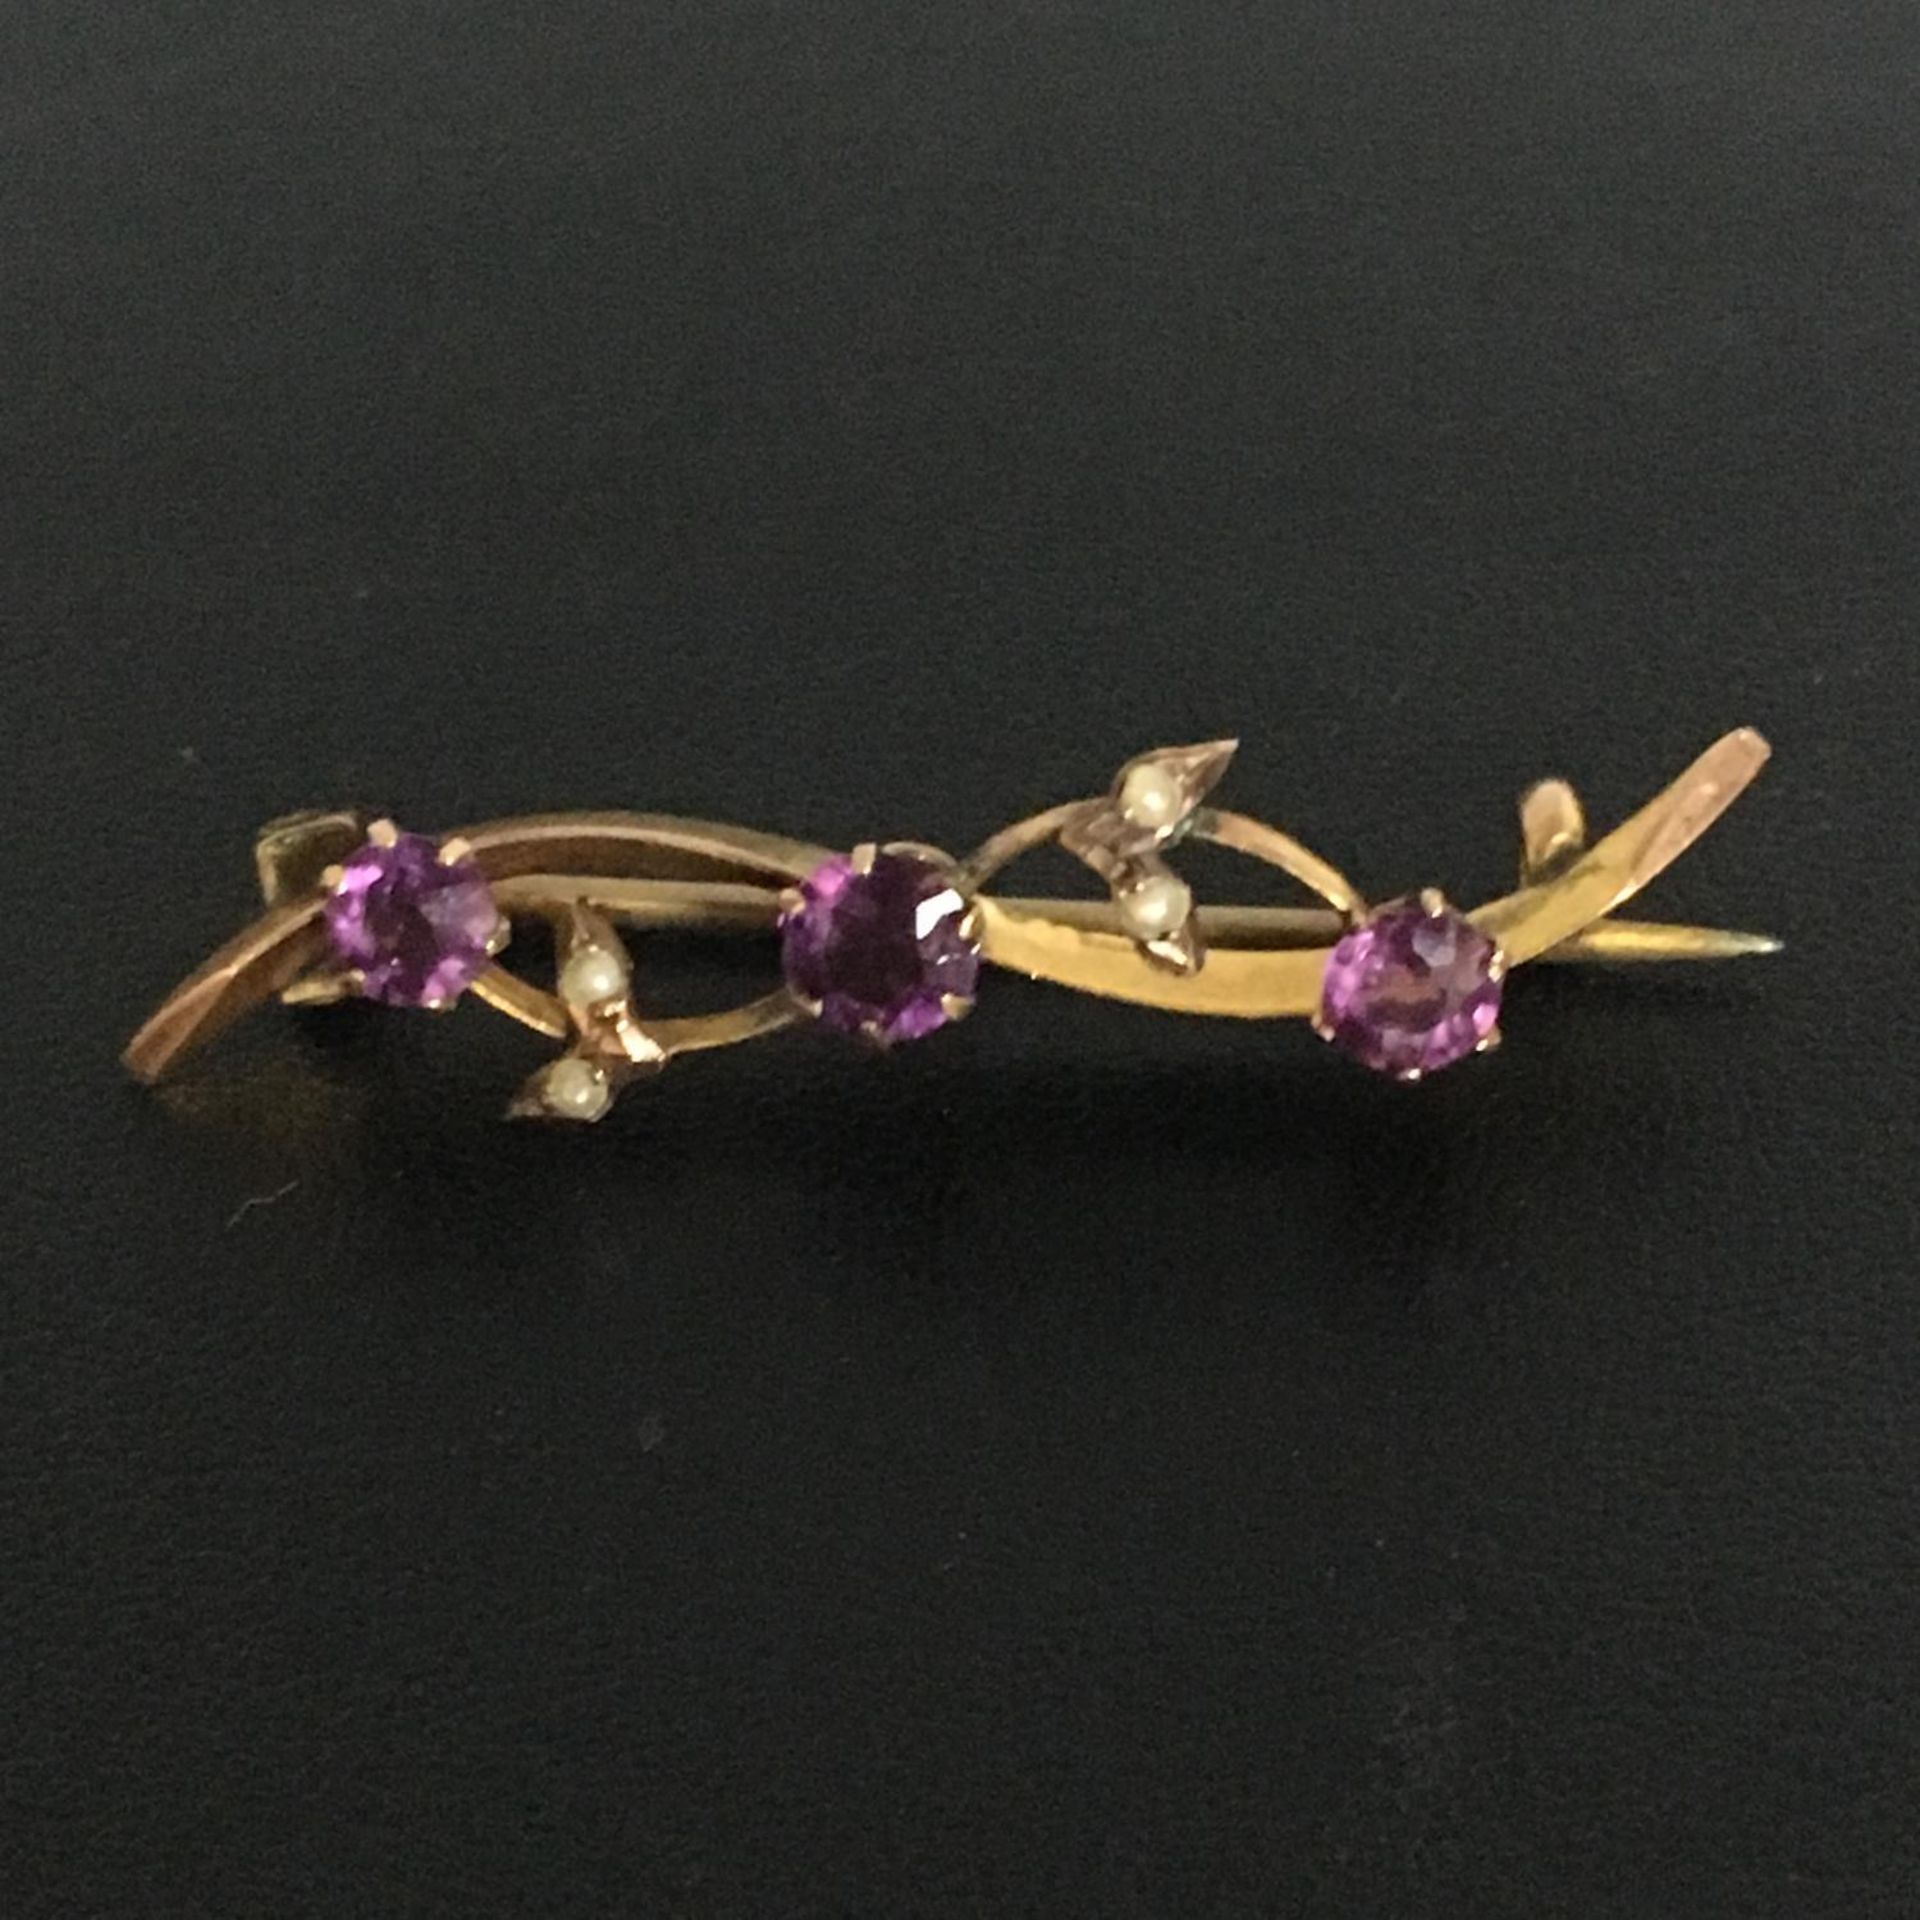 9CT GOLD AMETHYST AND SEED PEARL BAR BROOCH. In a wave design with a "c" clasp. The hammer price